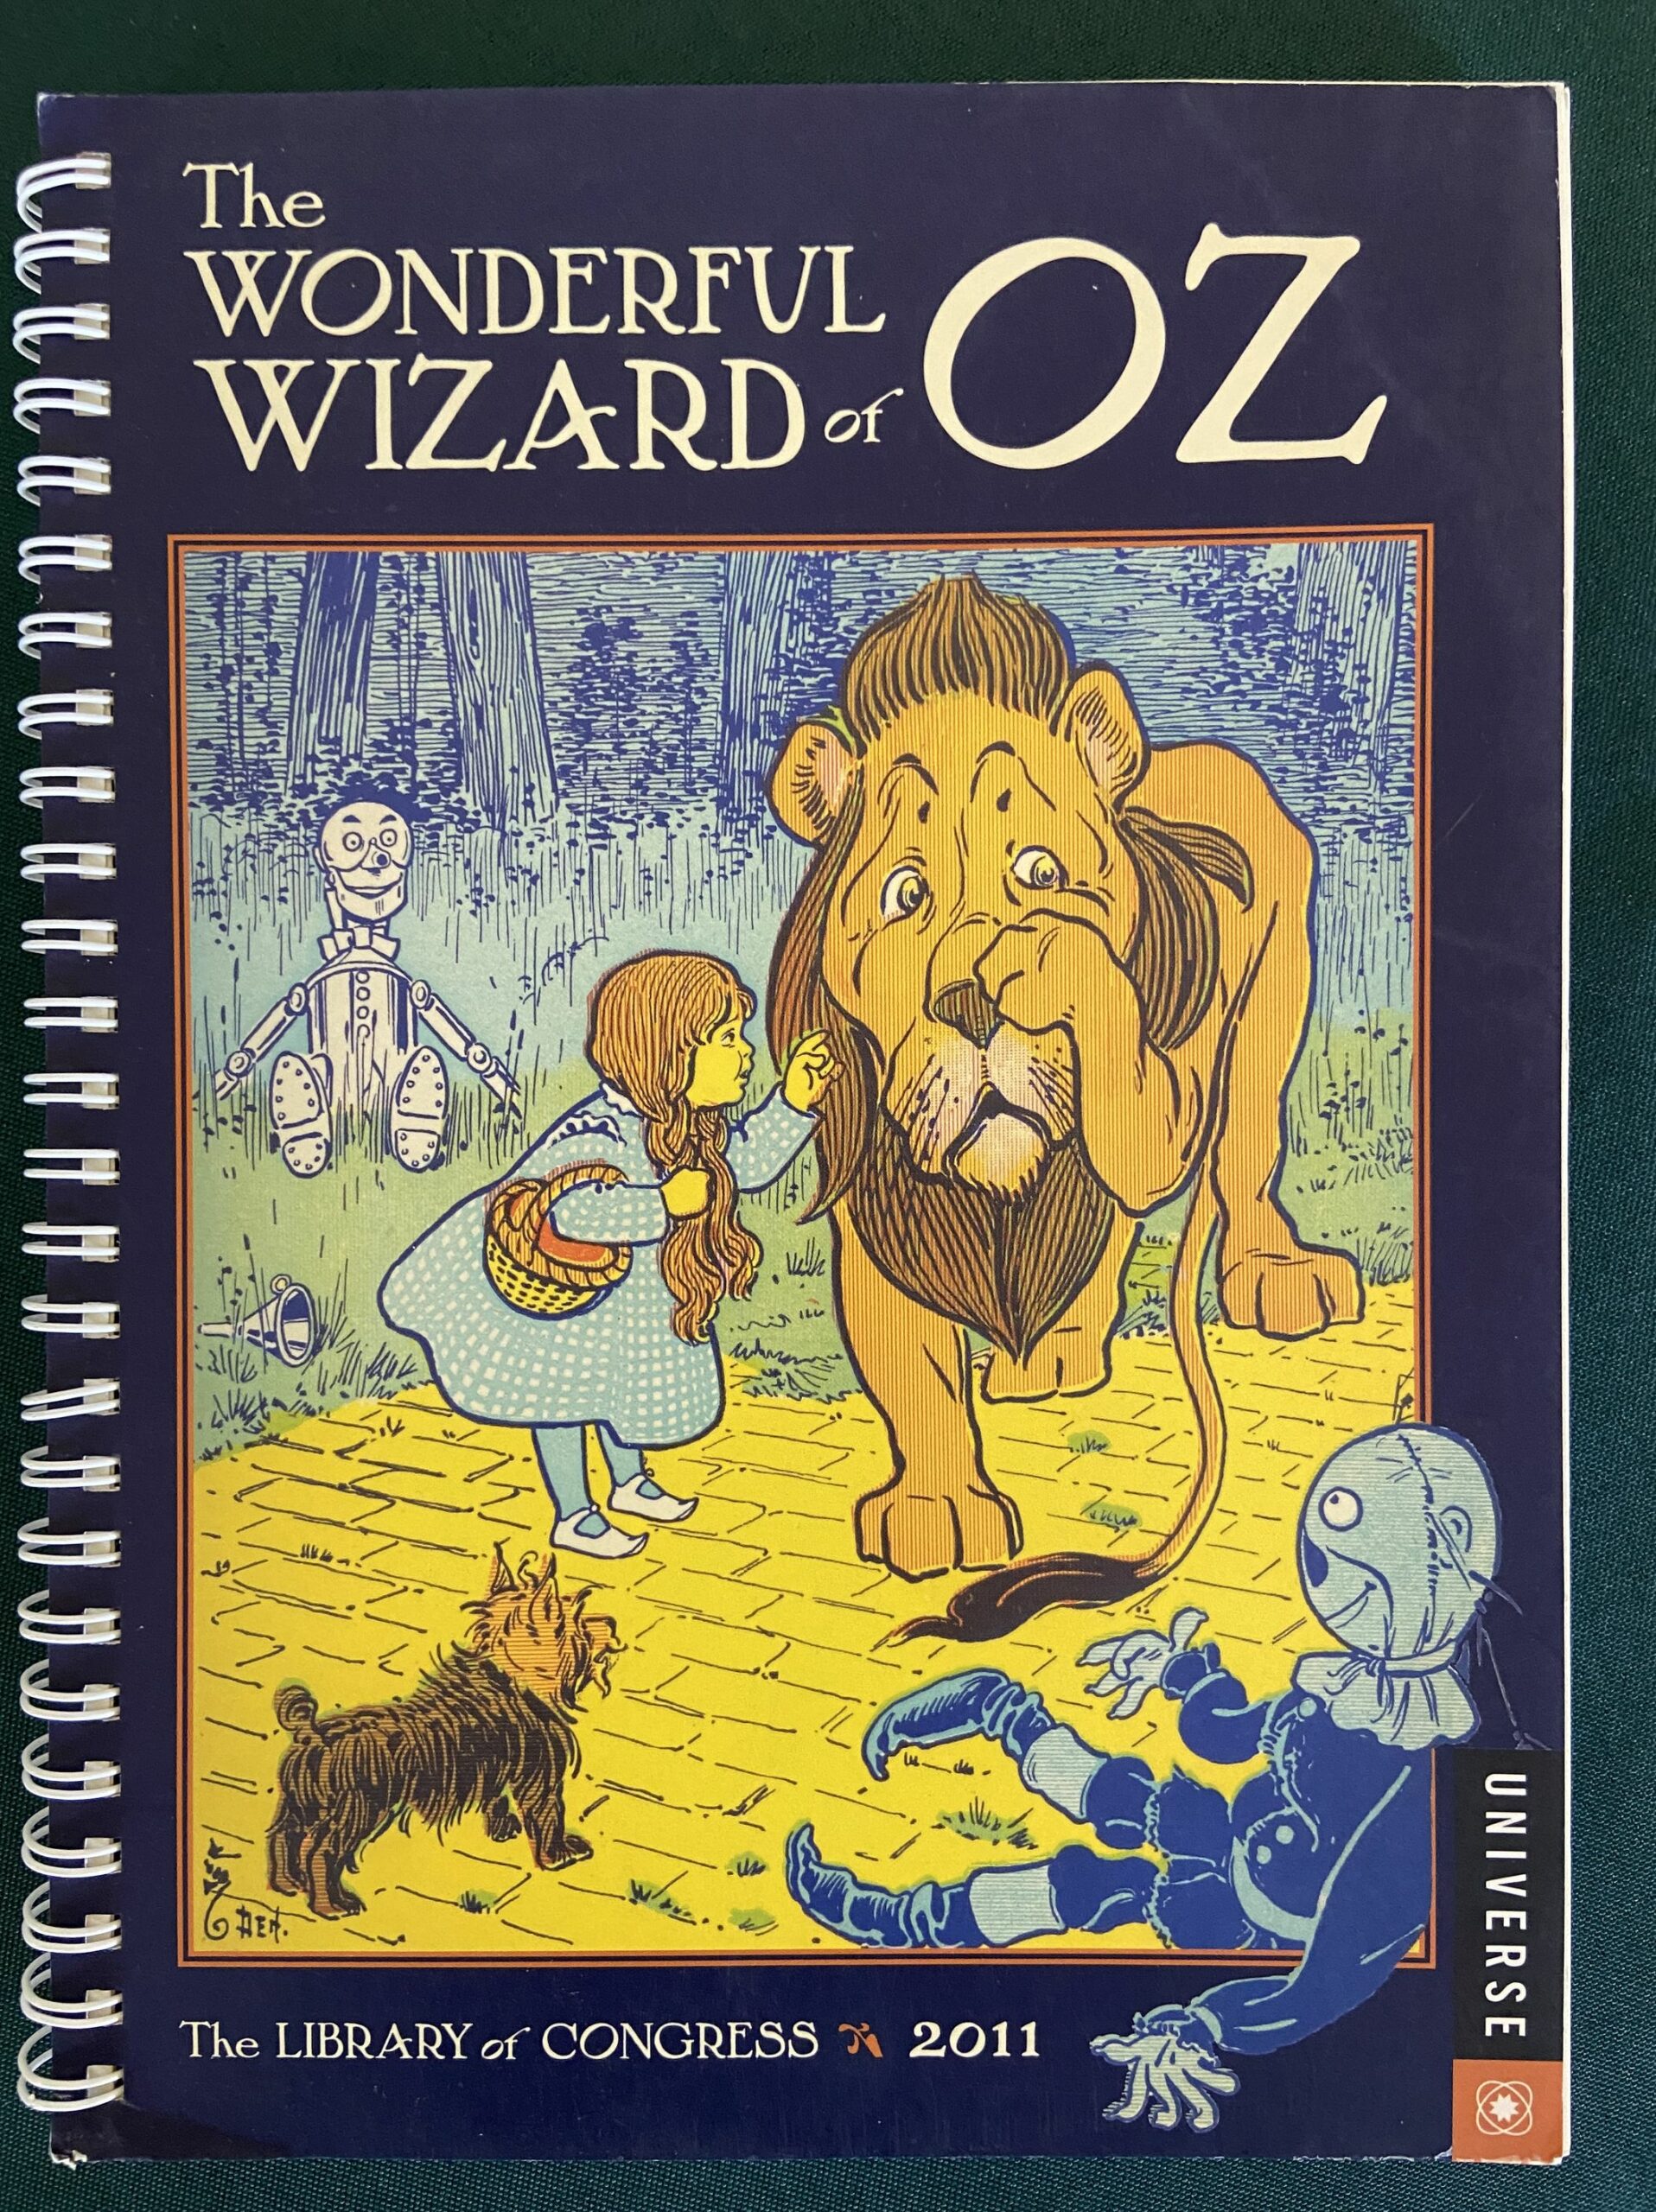 Sold The Wonderful Wizard of Oz 2011 Desk Calendar by Library of